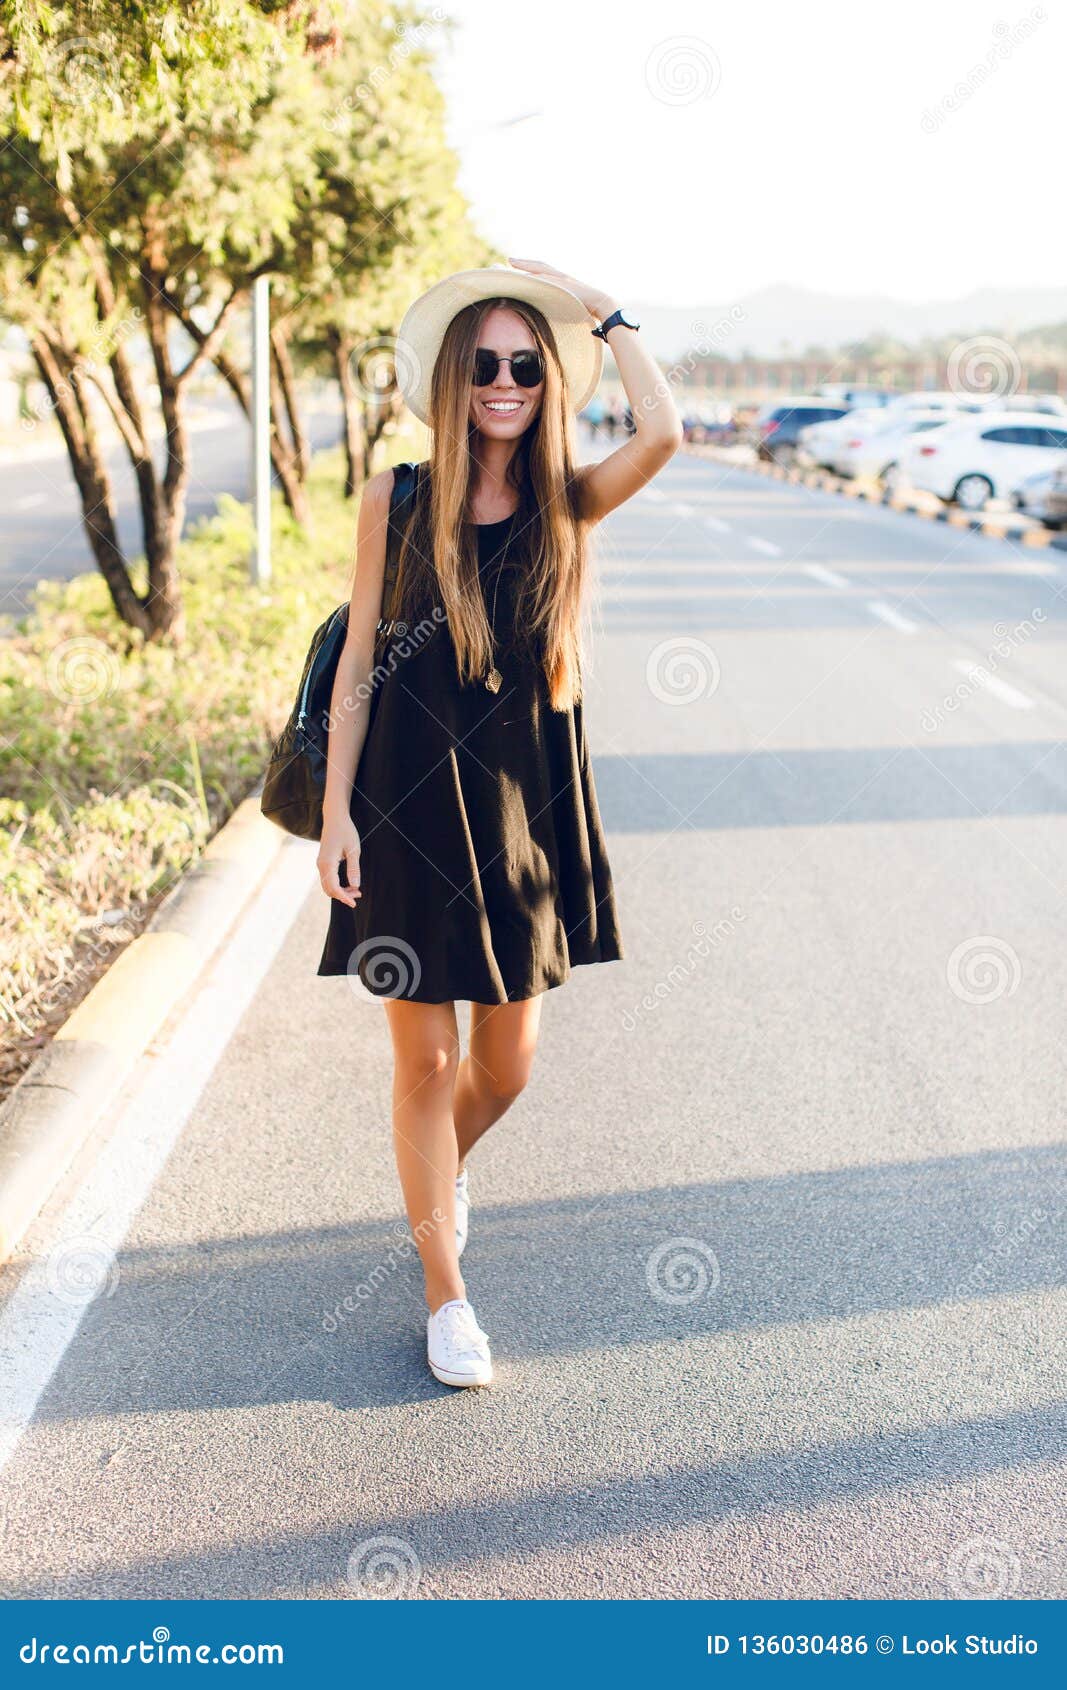 little black dress with sneakers